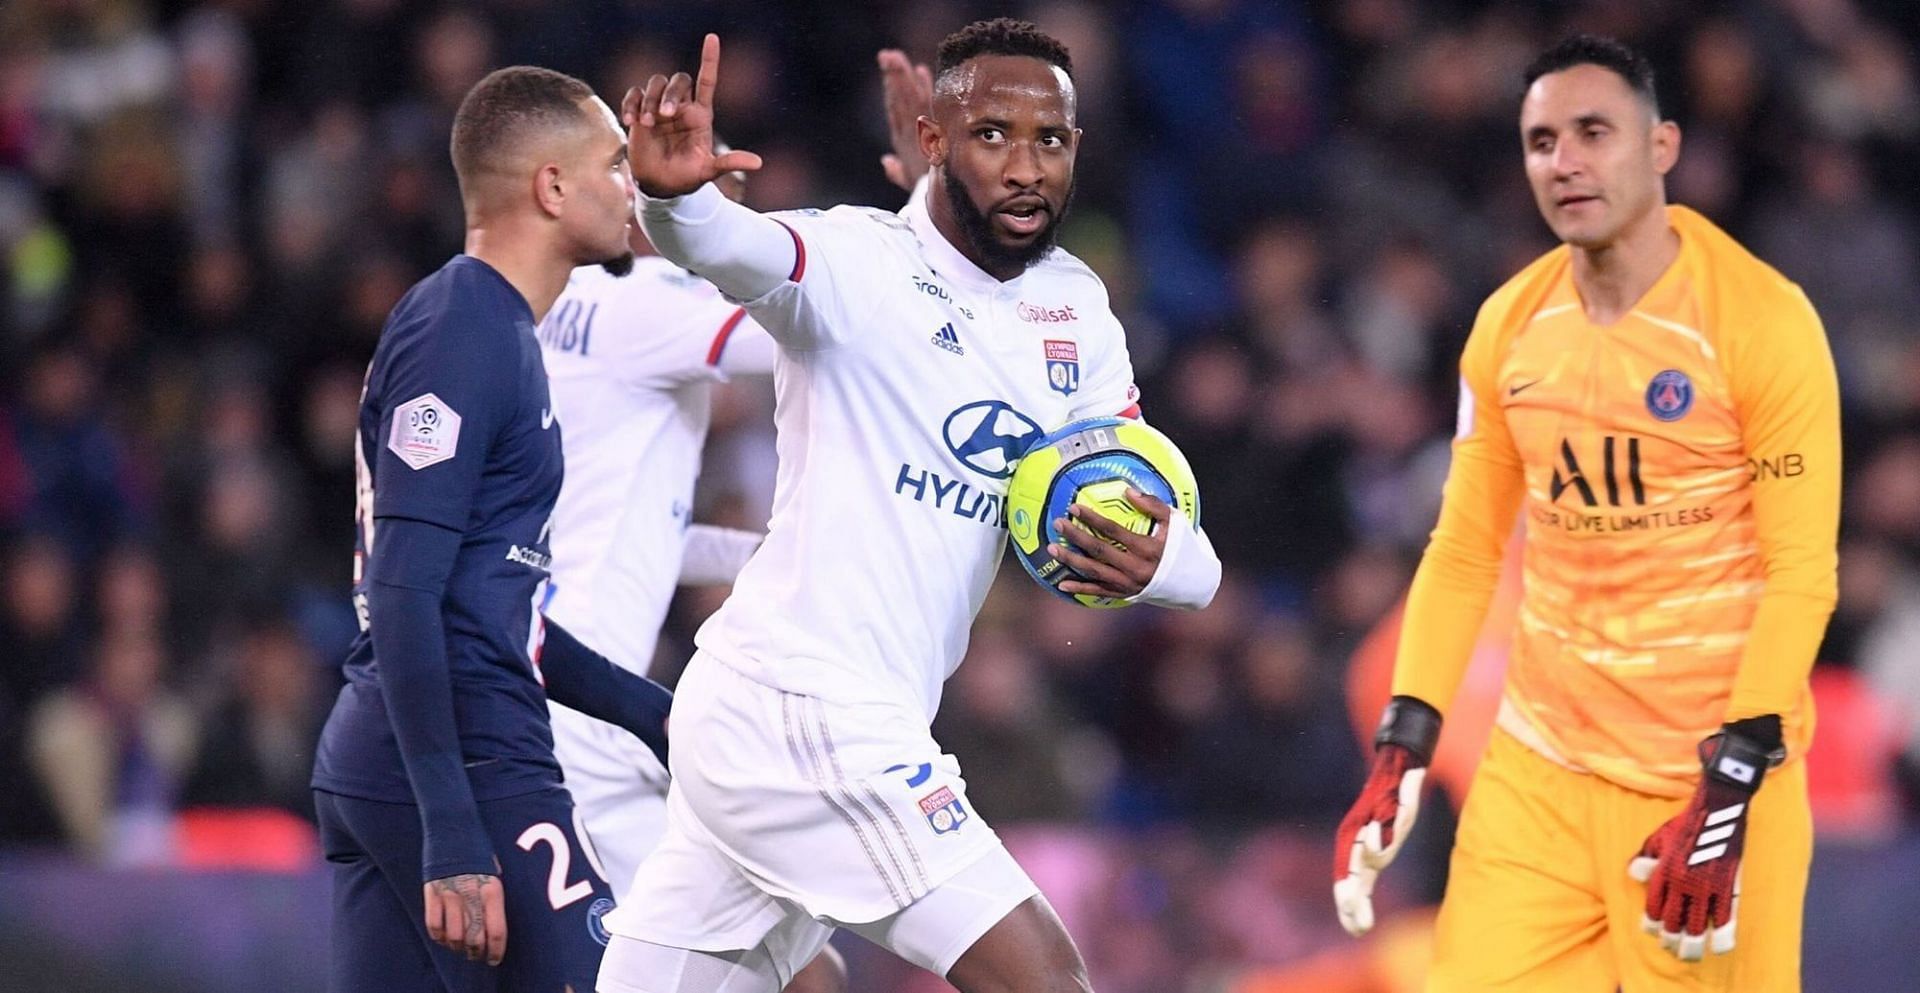 Can Moussa Dembele find the net for Lyon against Clermont this weekend?